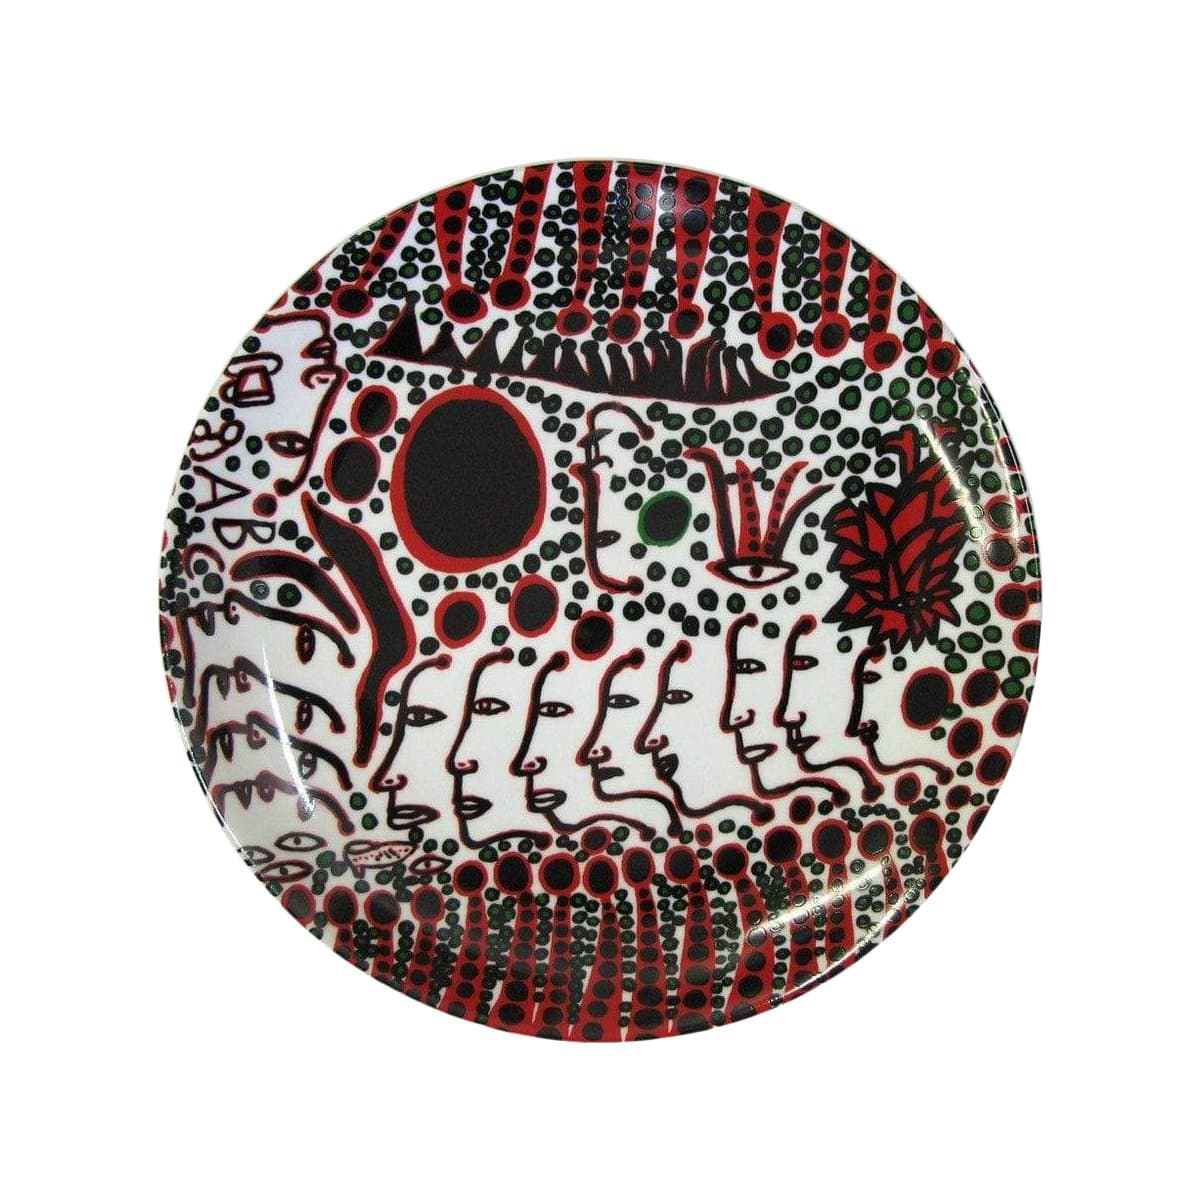 Yayoi Kusama Collaborates With Third Drawer Down on Collectibles